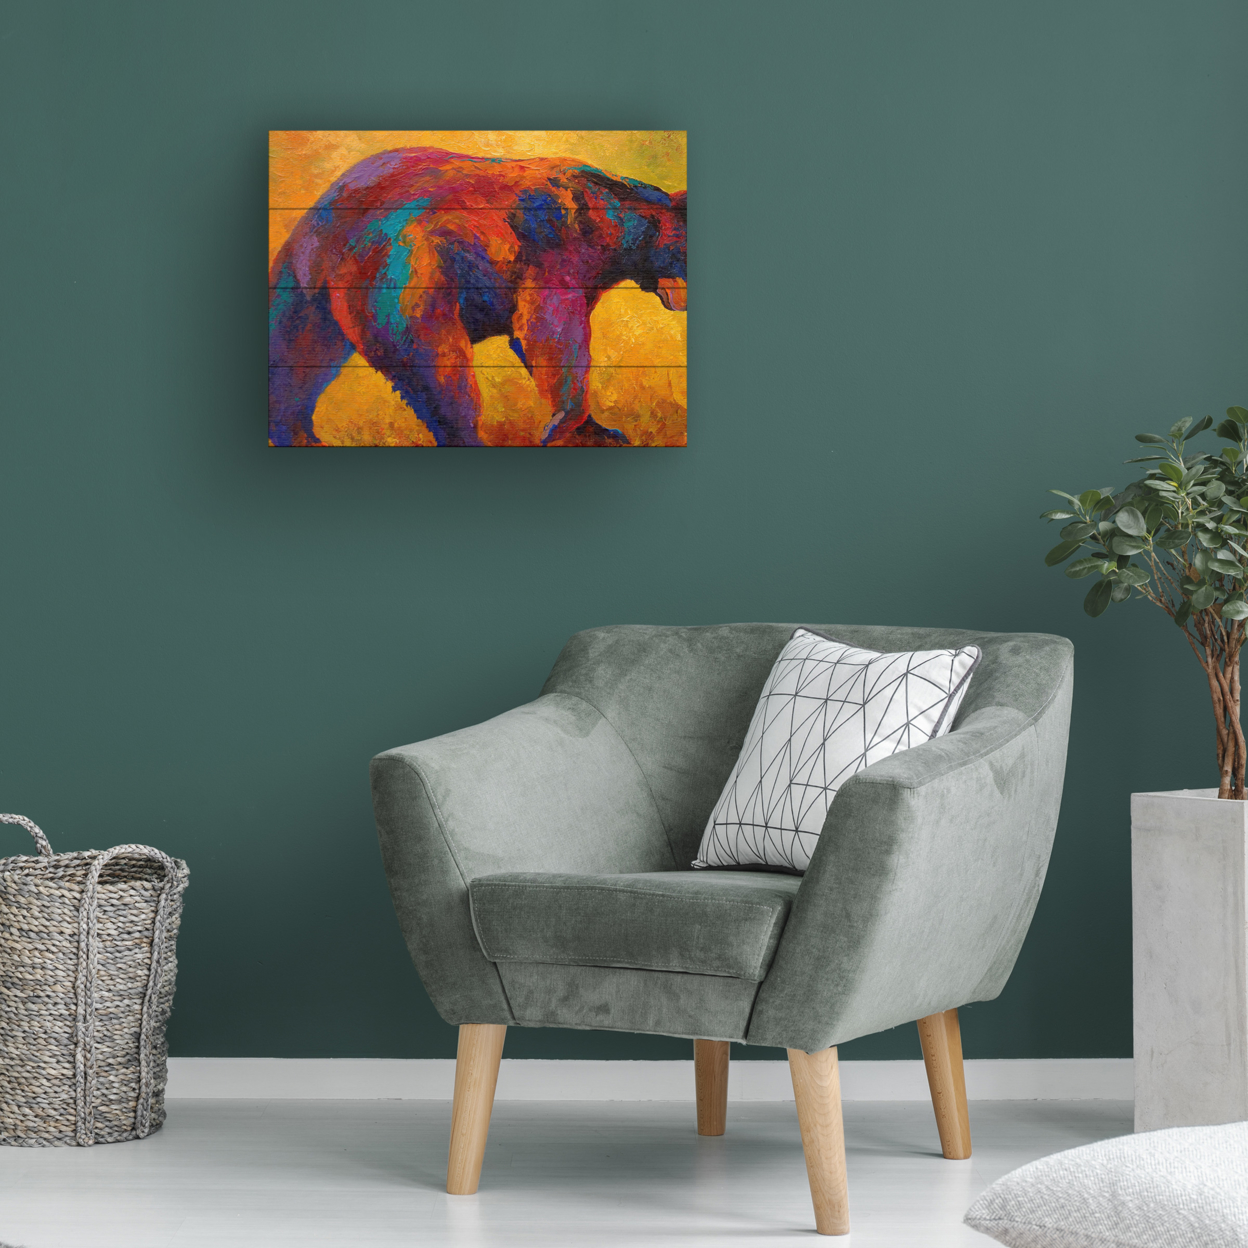 Wall Art 12 X 16 Inches Titled Daily Rounds Black Bear Ready To Hang Printed On Wooden Planks